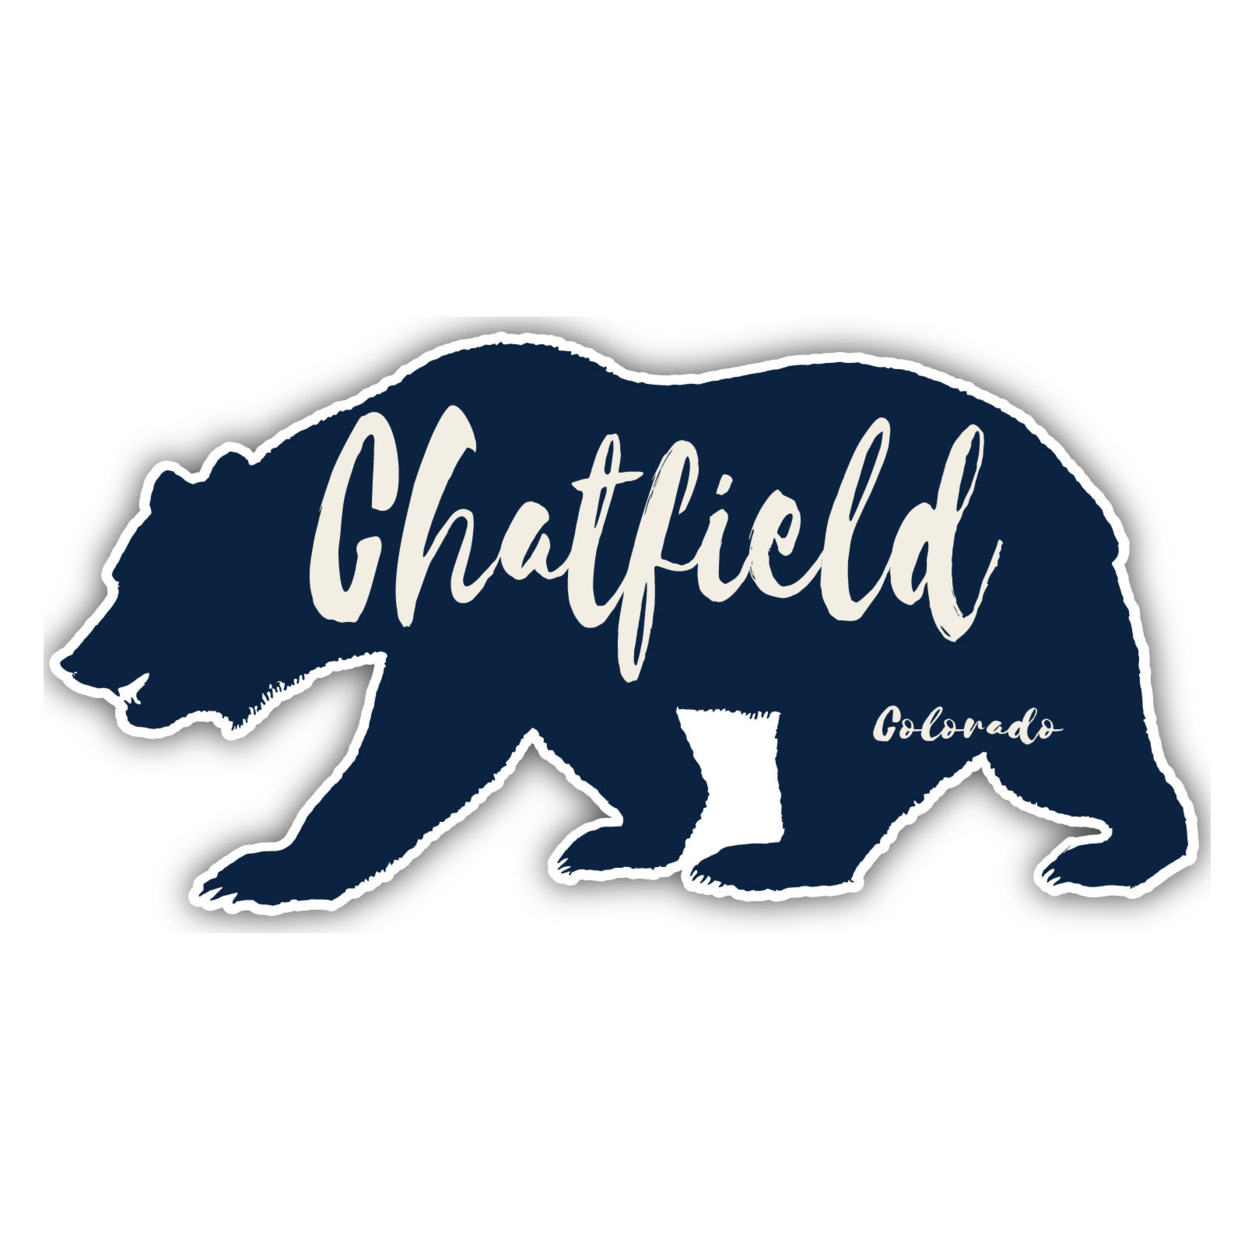 Chatfield Colorado Souvenir Decorative Stickers (Choose Theme And Size) - 4-Pack, 6-Inch, Bear